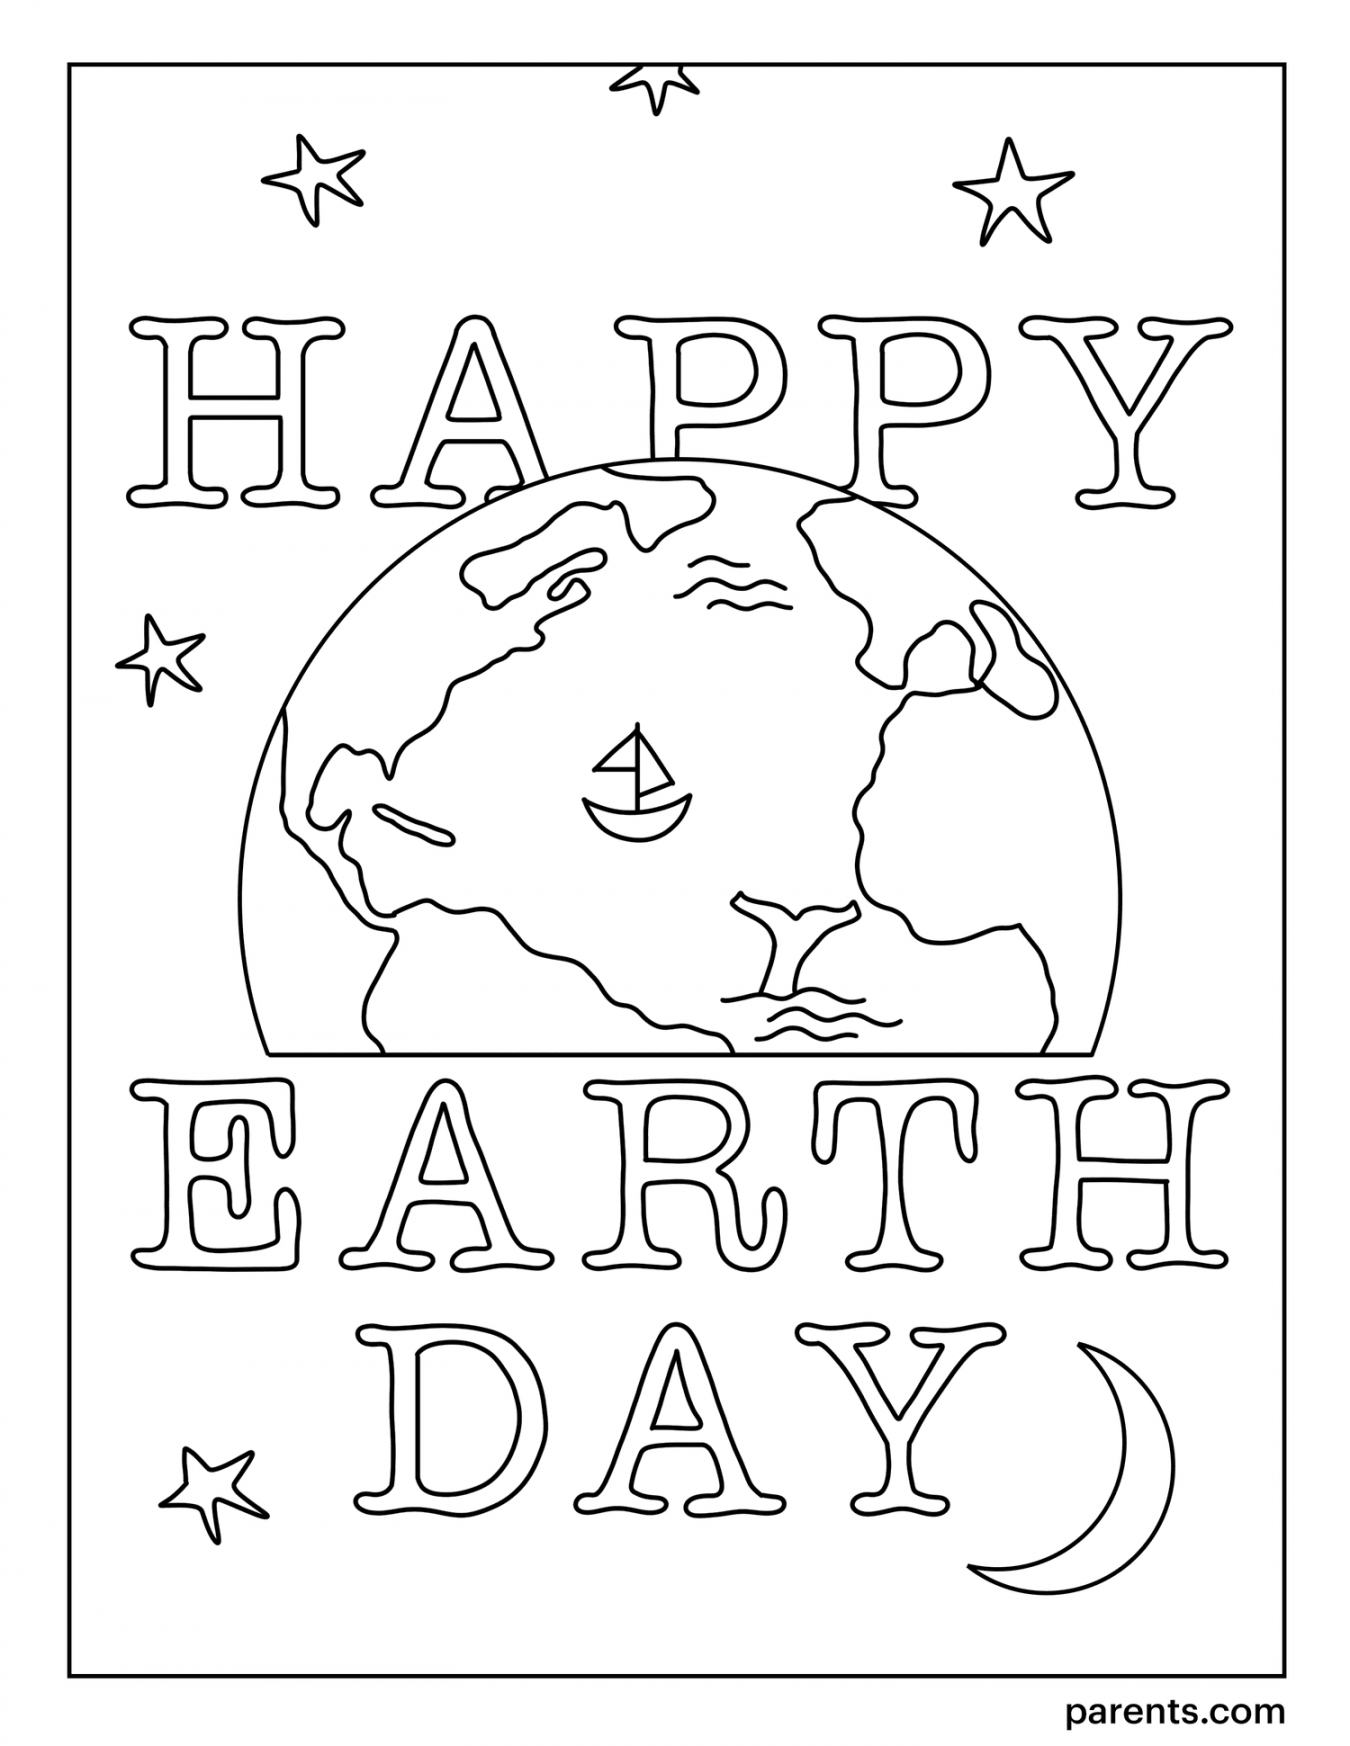 Earth Day Coloring Sheet Free Printable - Printable -  Free Earth Day Coloring Pages for Kids